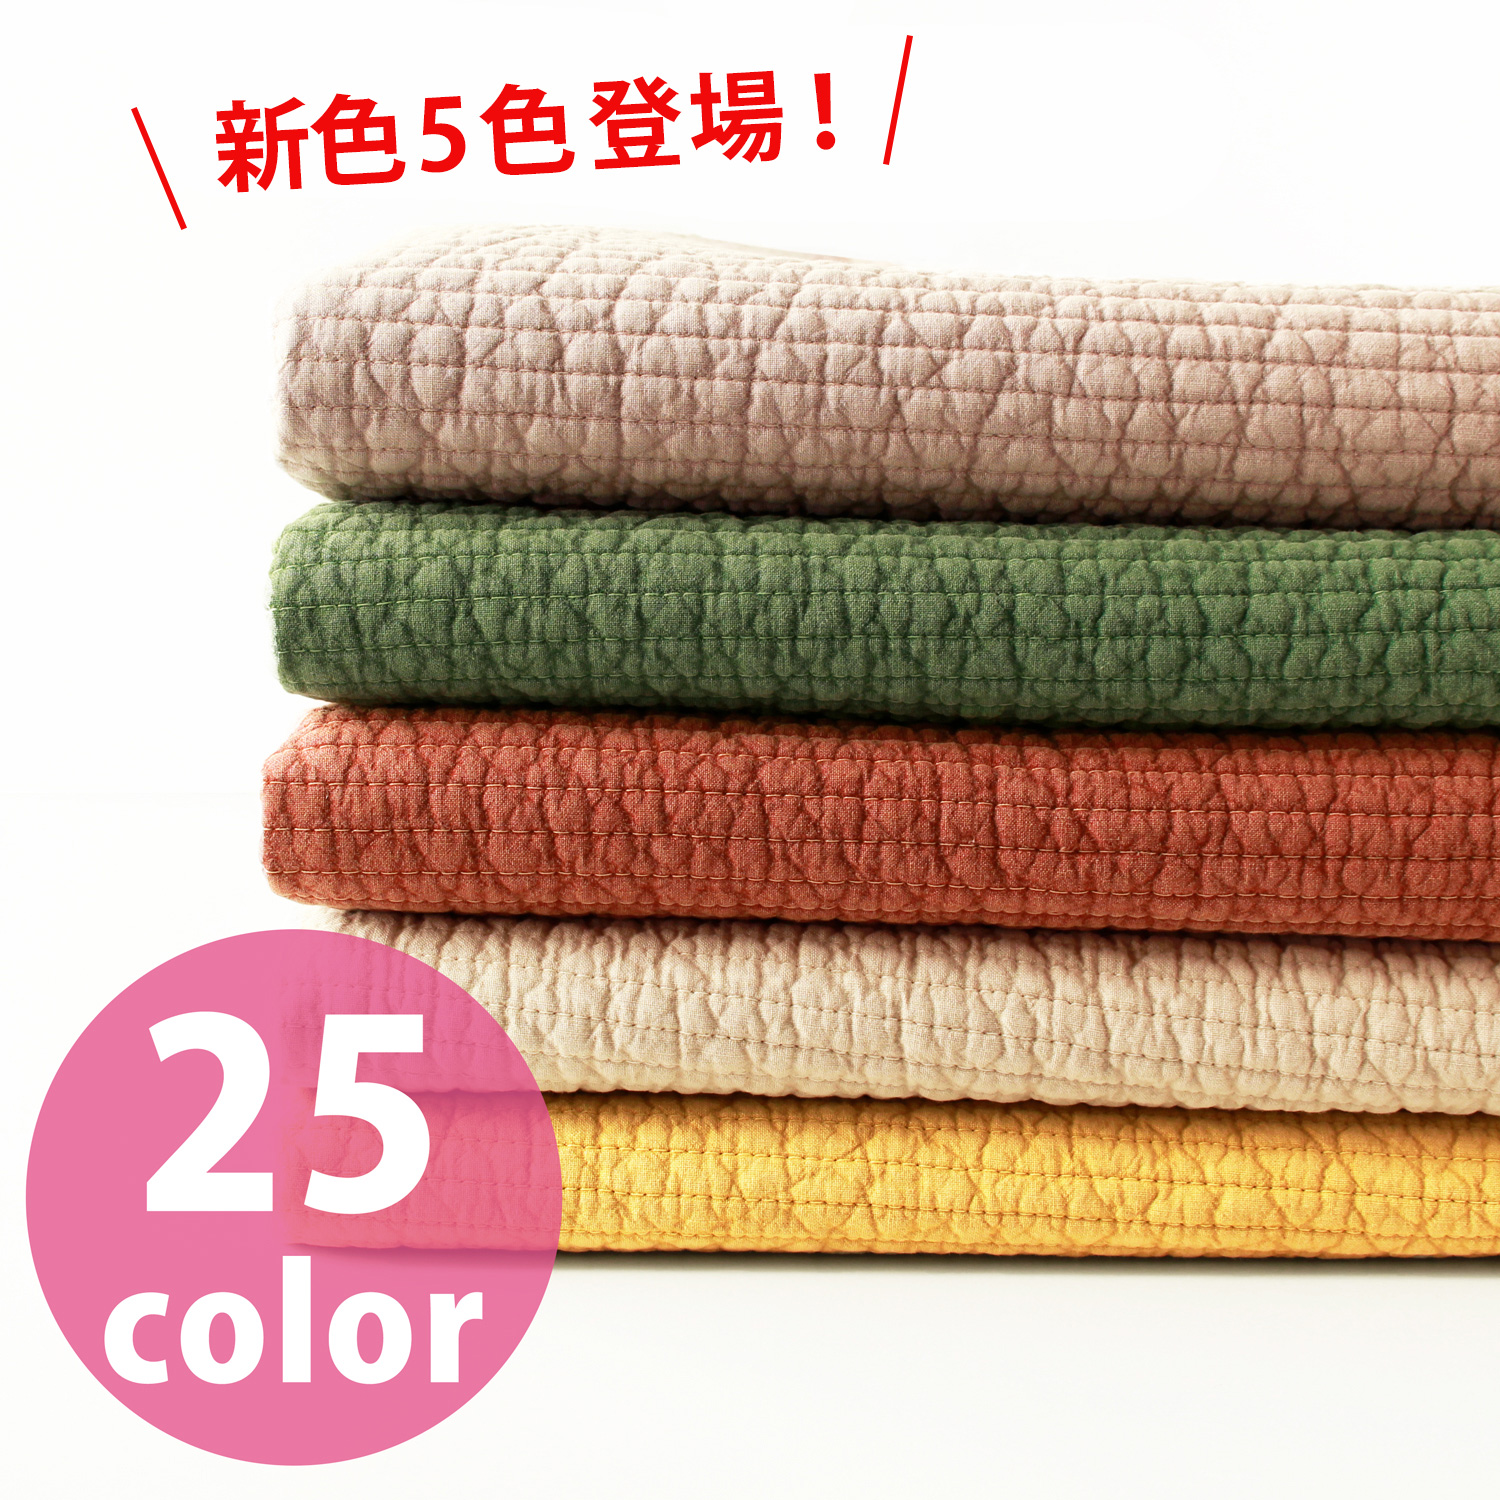 ■NBY307R Quilting Fabric 8m (roll)